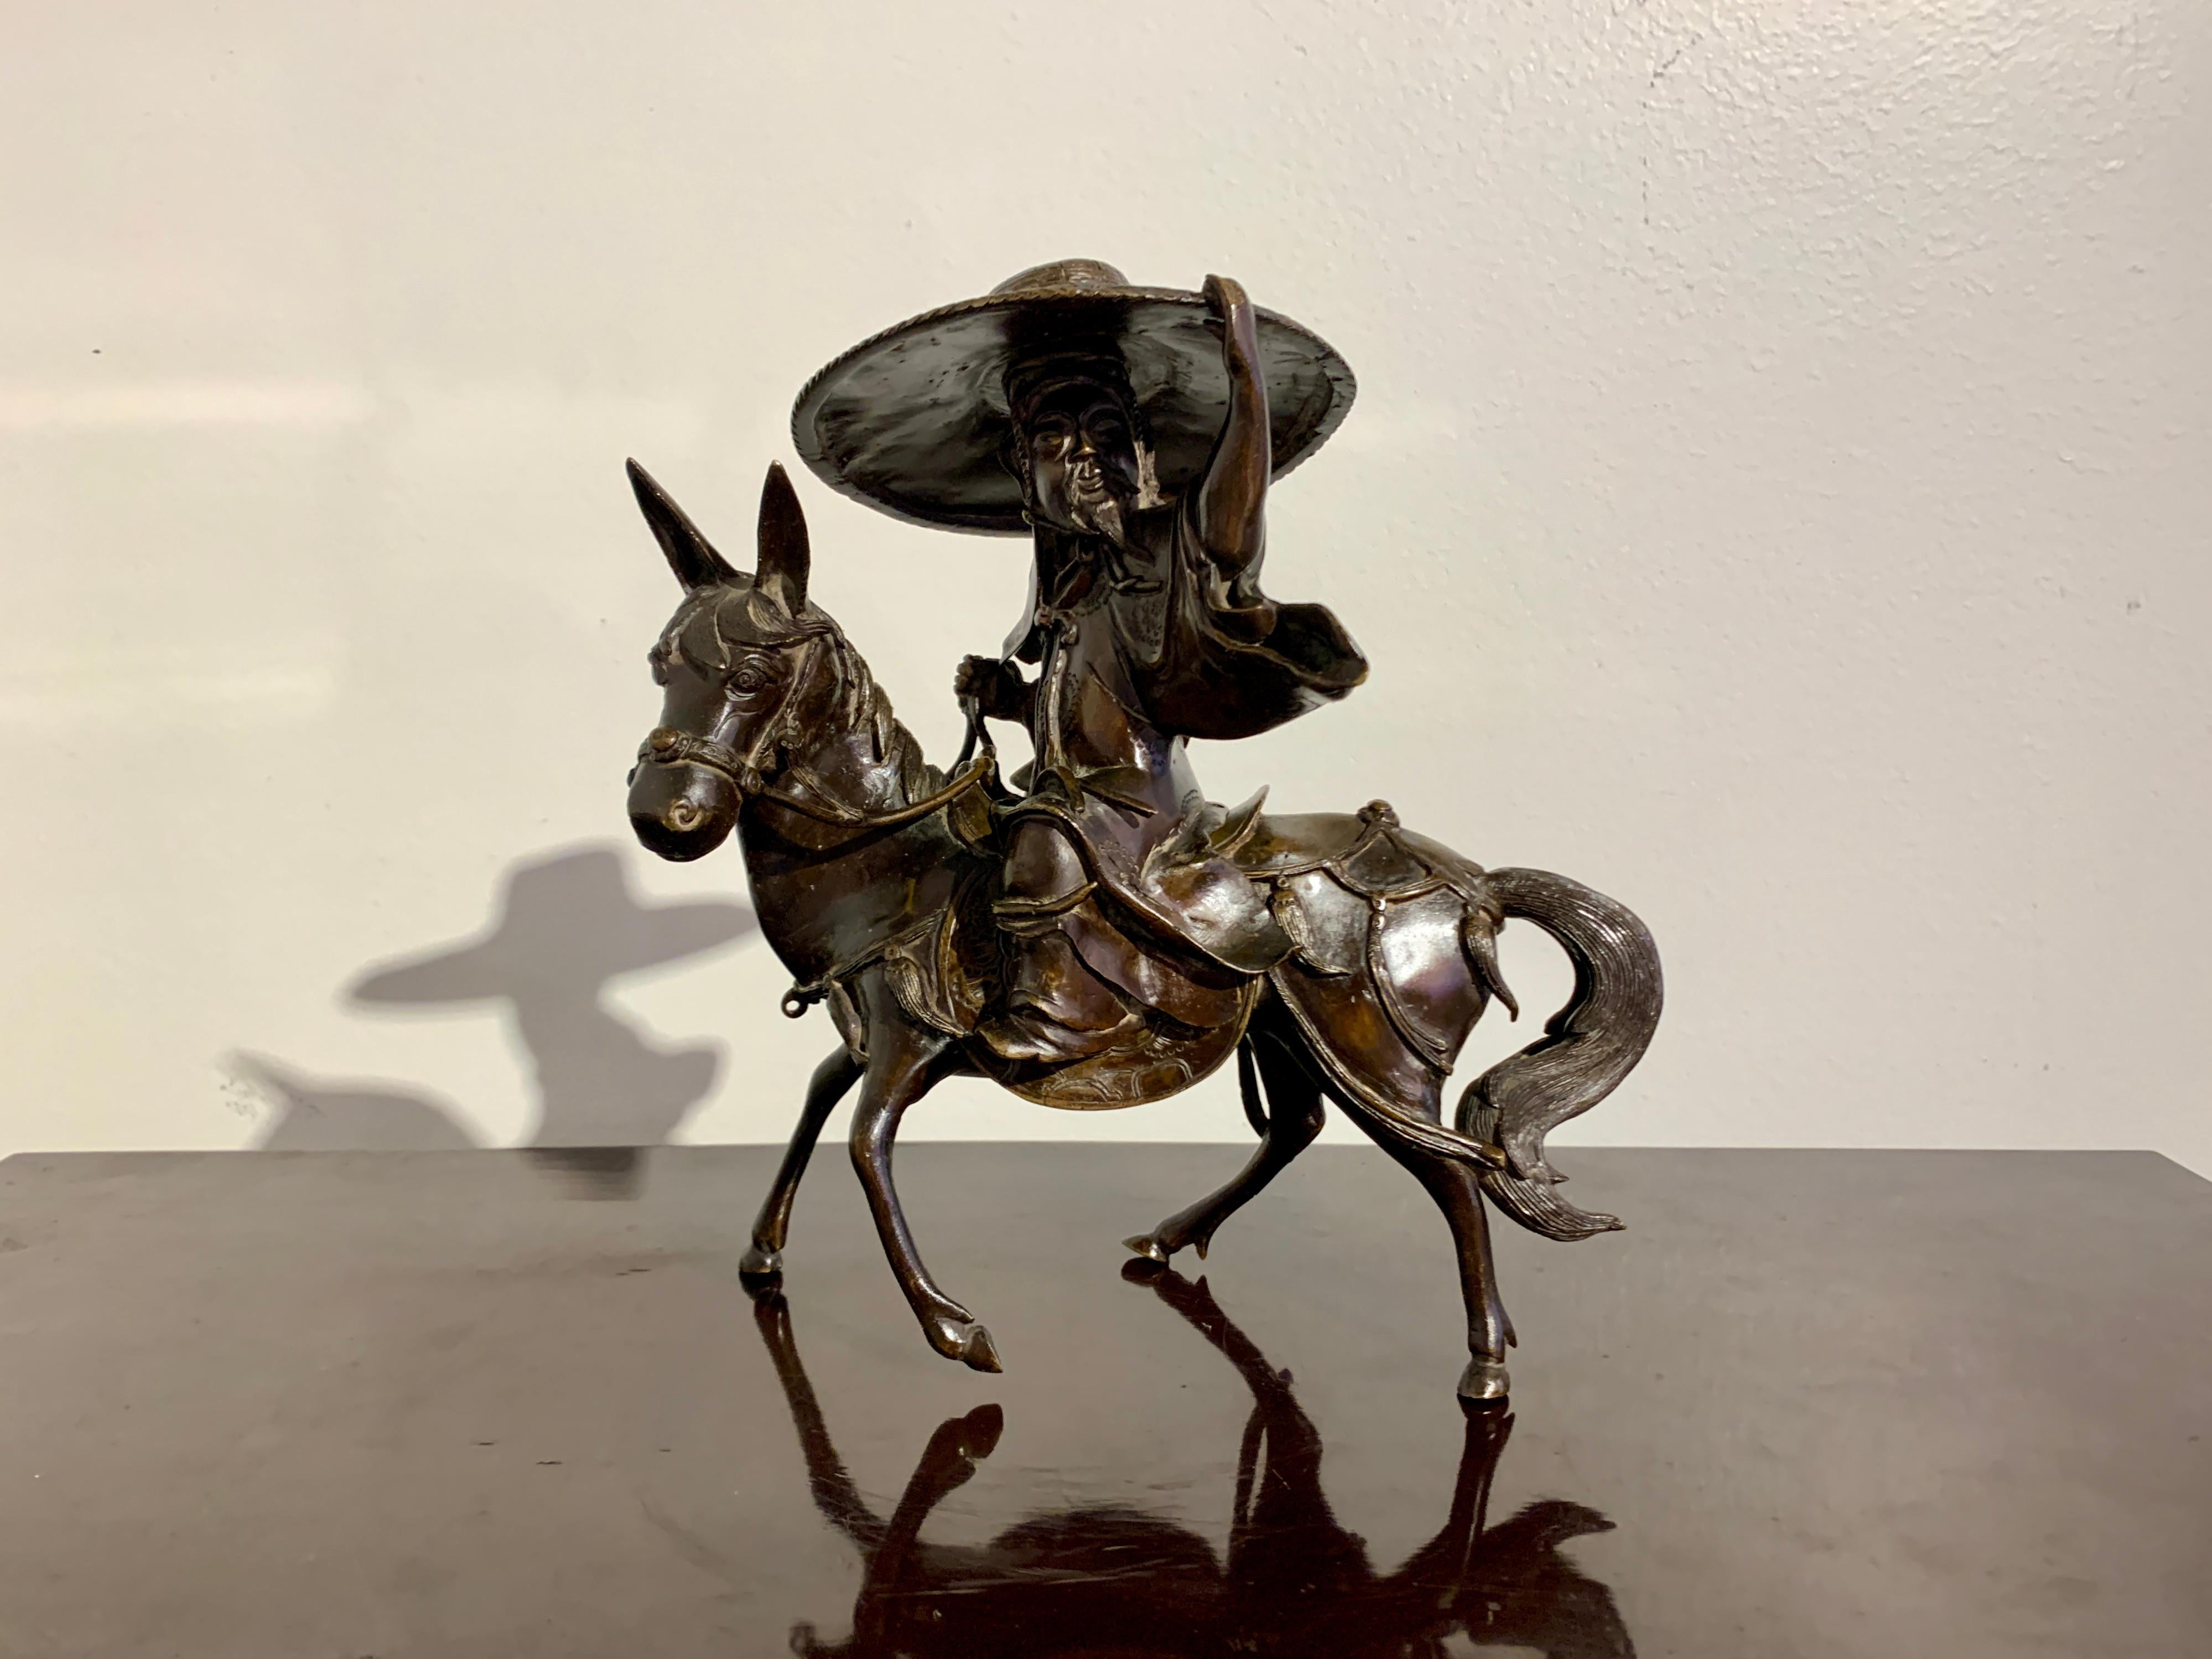 A dynamic Chinese two part censer of a robed and hatted scholar or sage riding a donkey, Qing Dynasty, late 19th century, China.

The censer depicts a gentleman scholar, most likely the Song Dynasty literati figure Su Shi (Su Dongpo). The